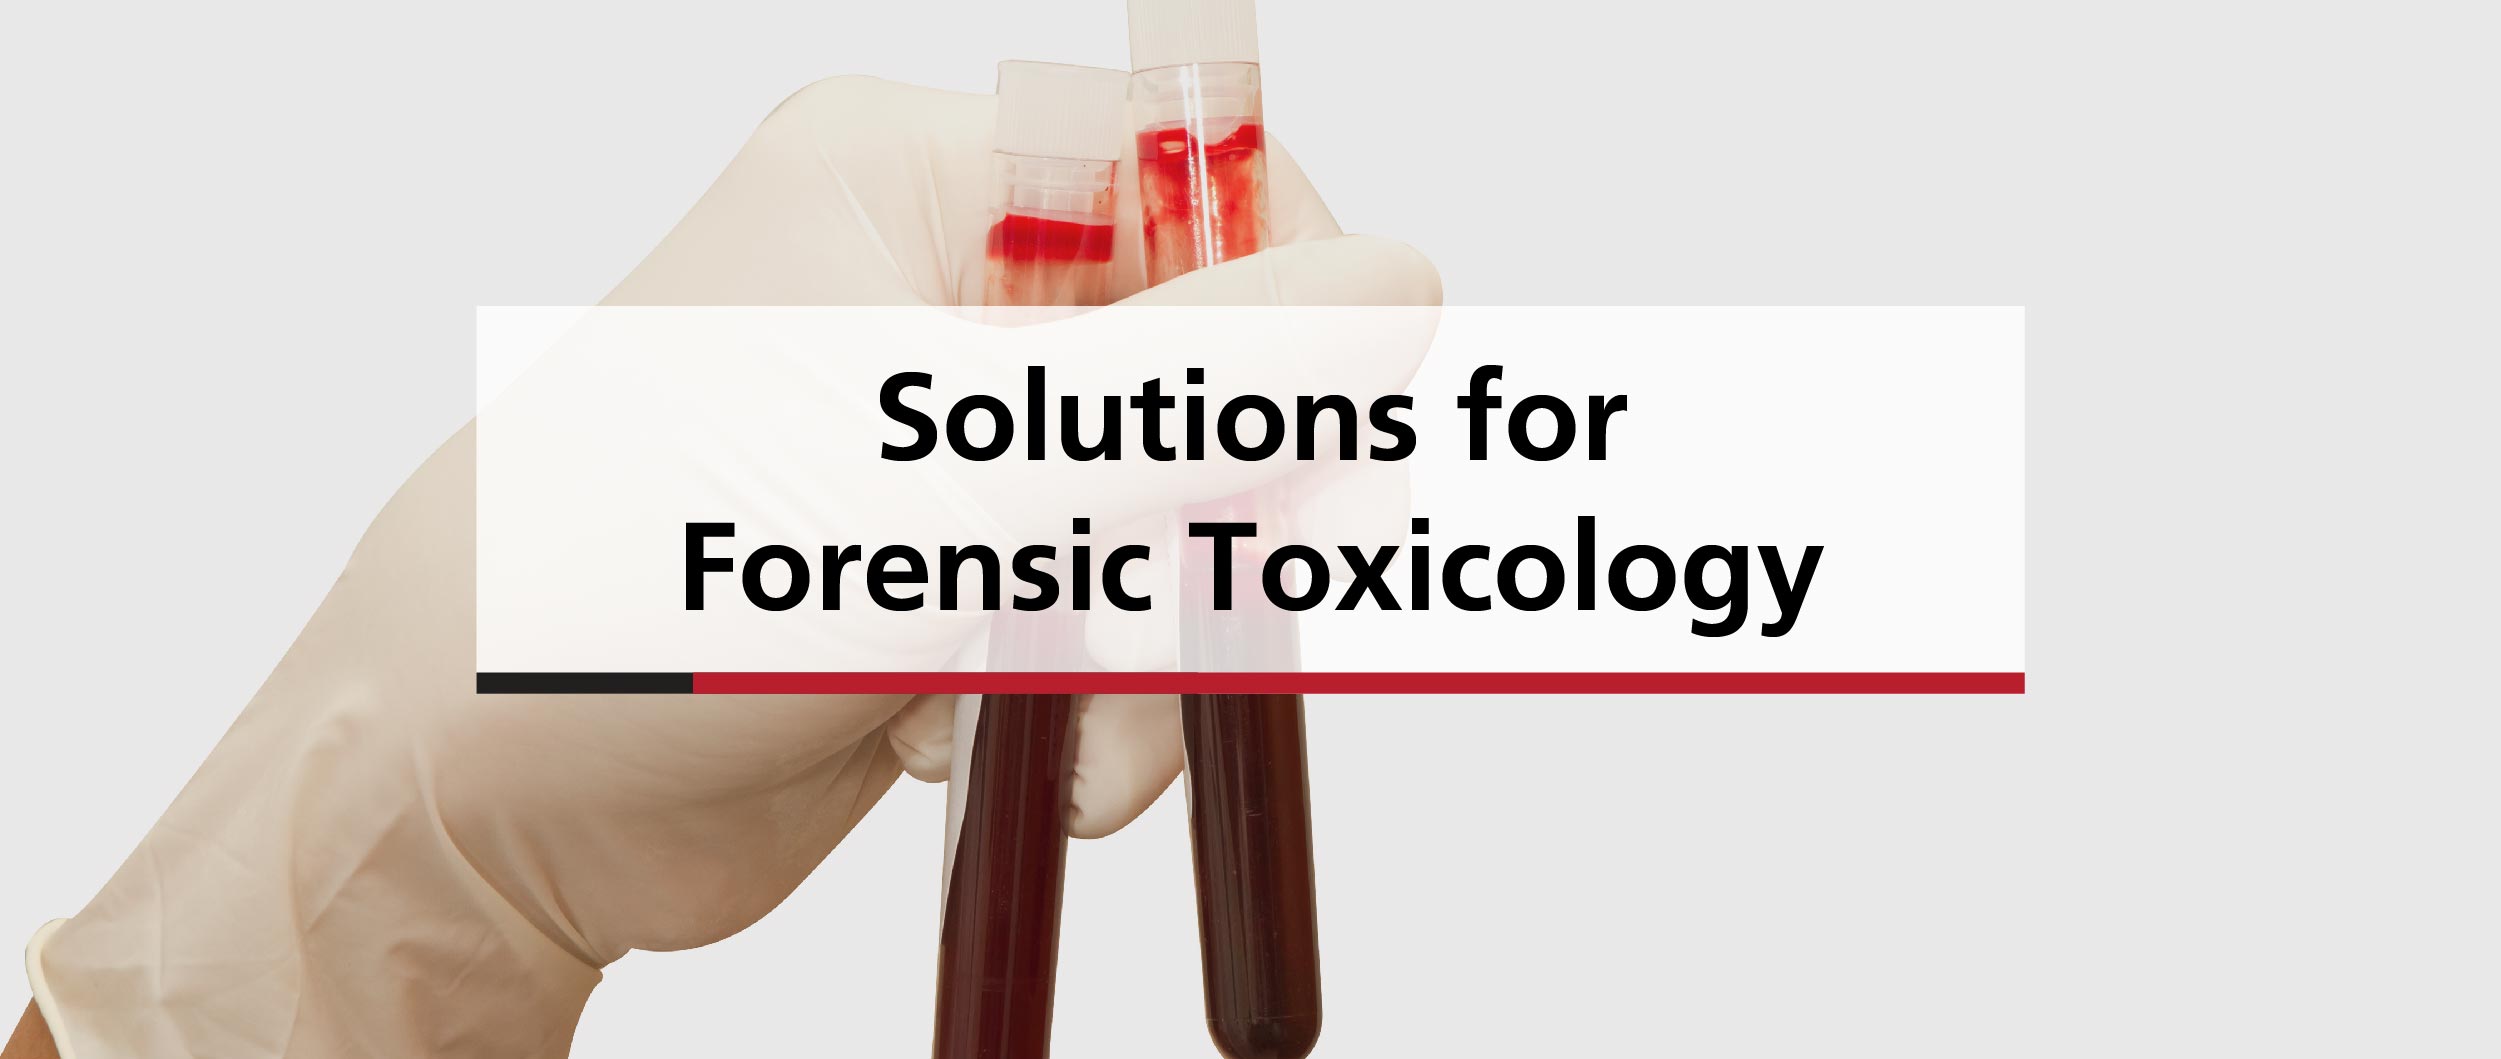 Solutions for Forensic Toxicology